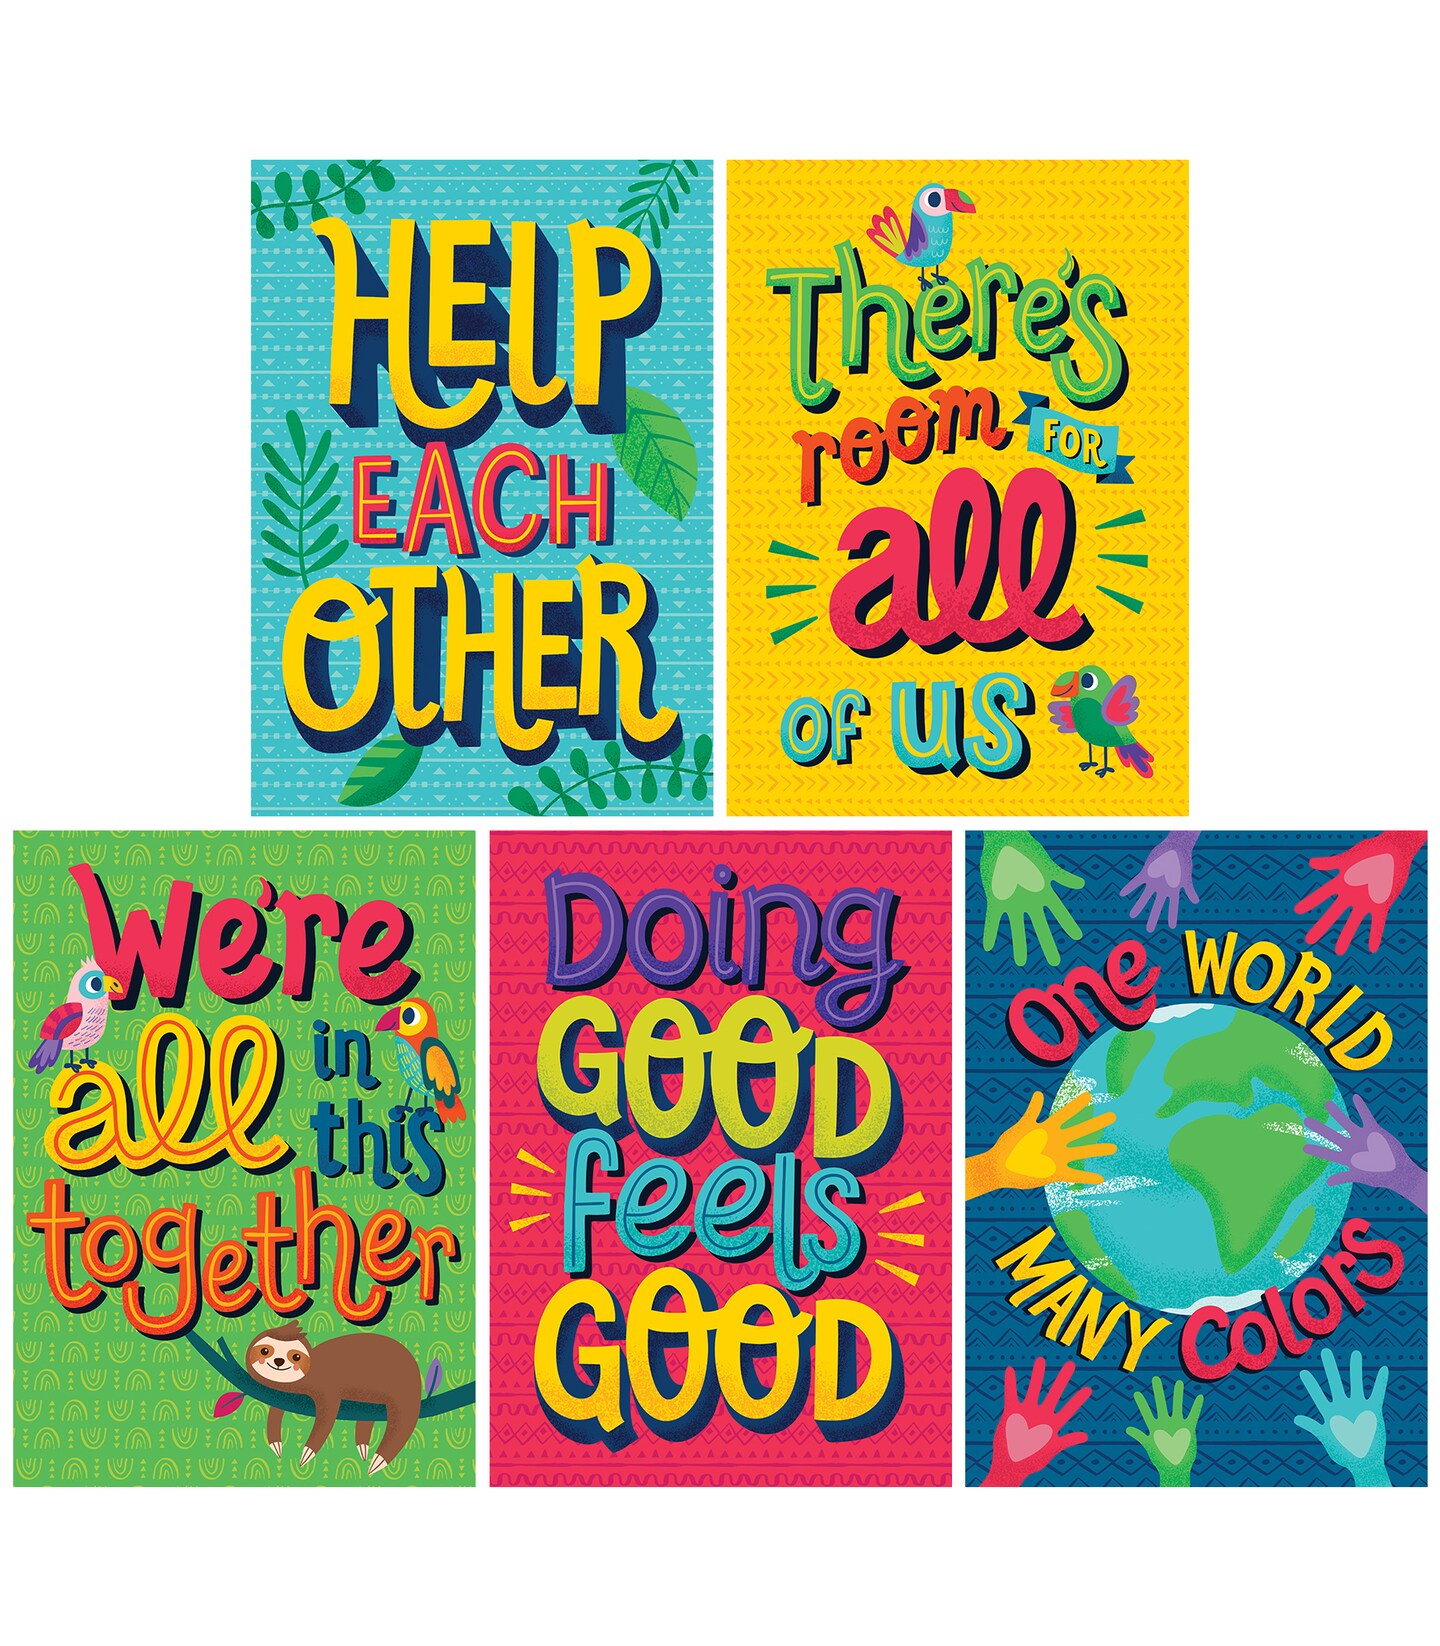 Carson Dellosa One World Motivational Poster Set, Colorful Classroom Posters With Inclusive, Inspirational Quotes, Homeschool or Classroom D&#xE9;cor (5 pc)